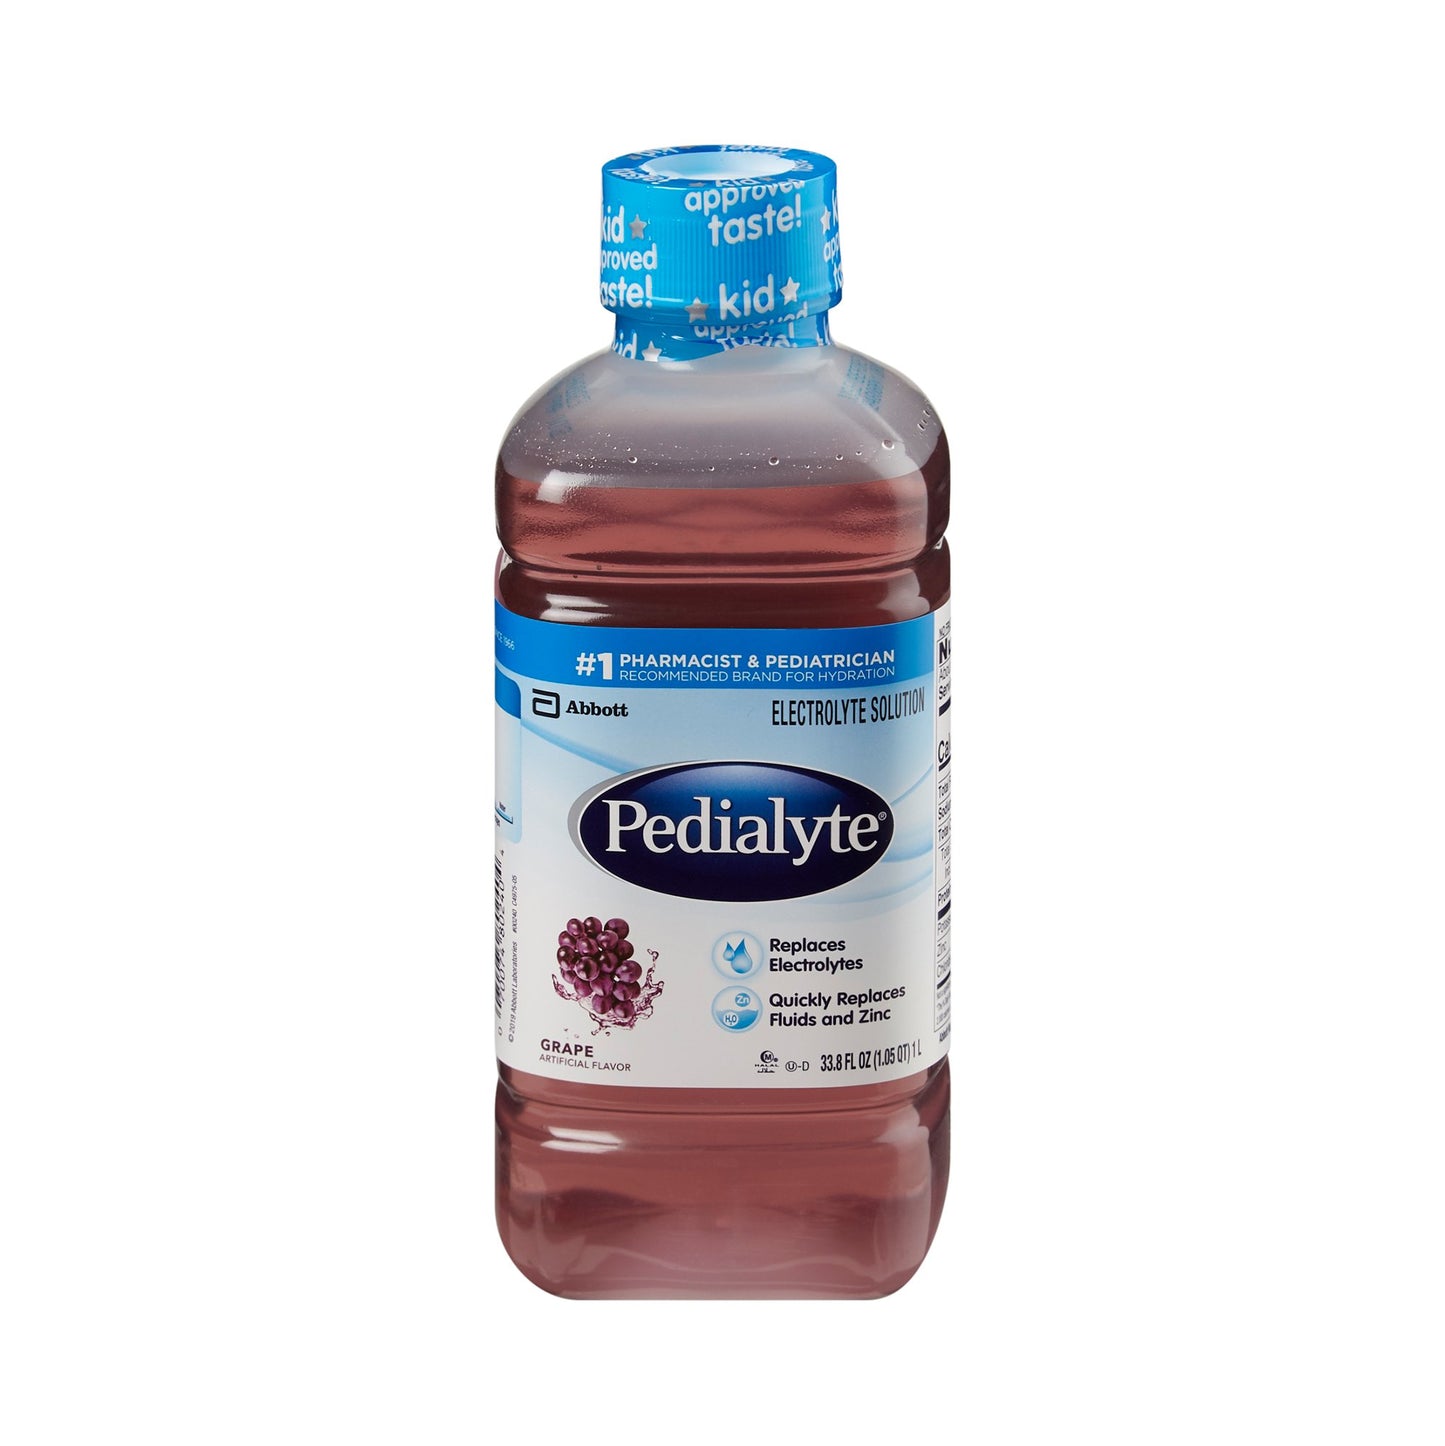 Pedialyte® Grape Oral Electrolyte Solution, 1 Liter, 8 pack